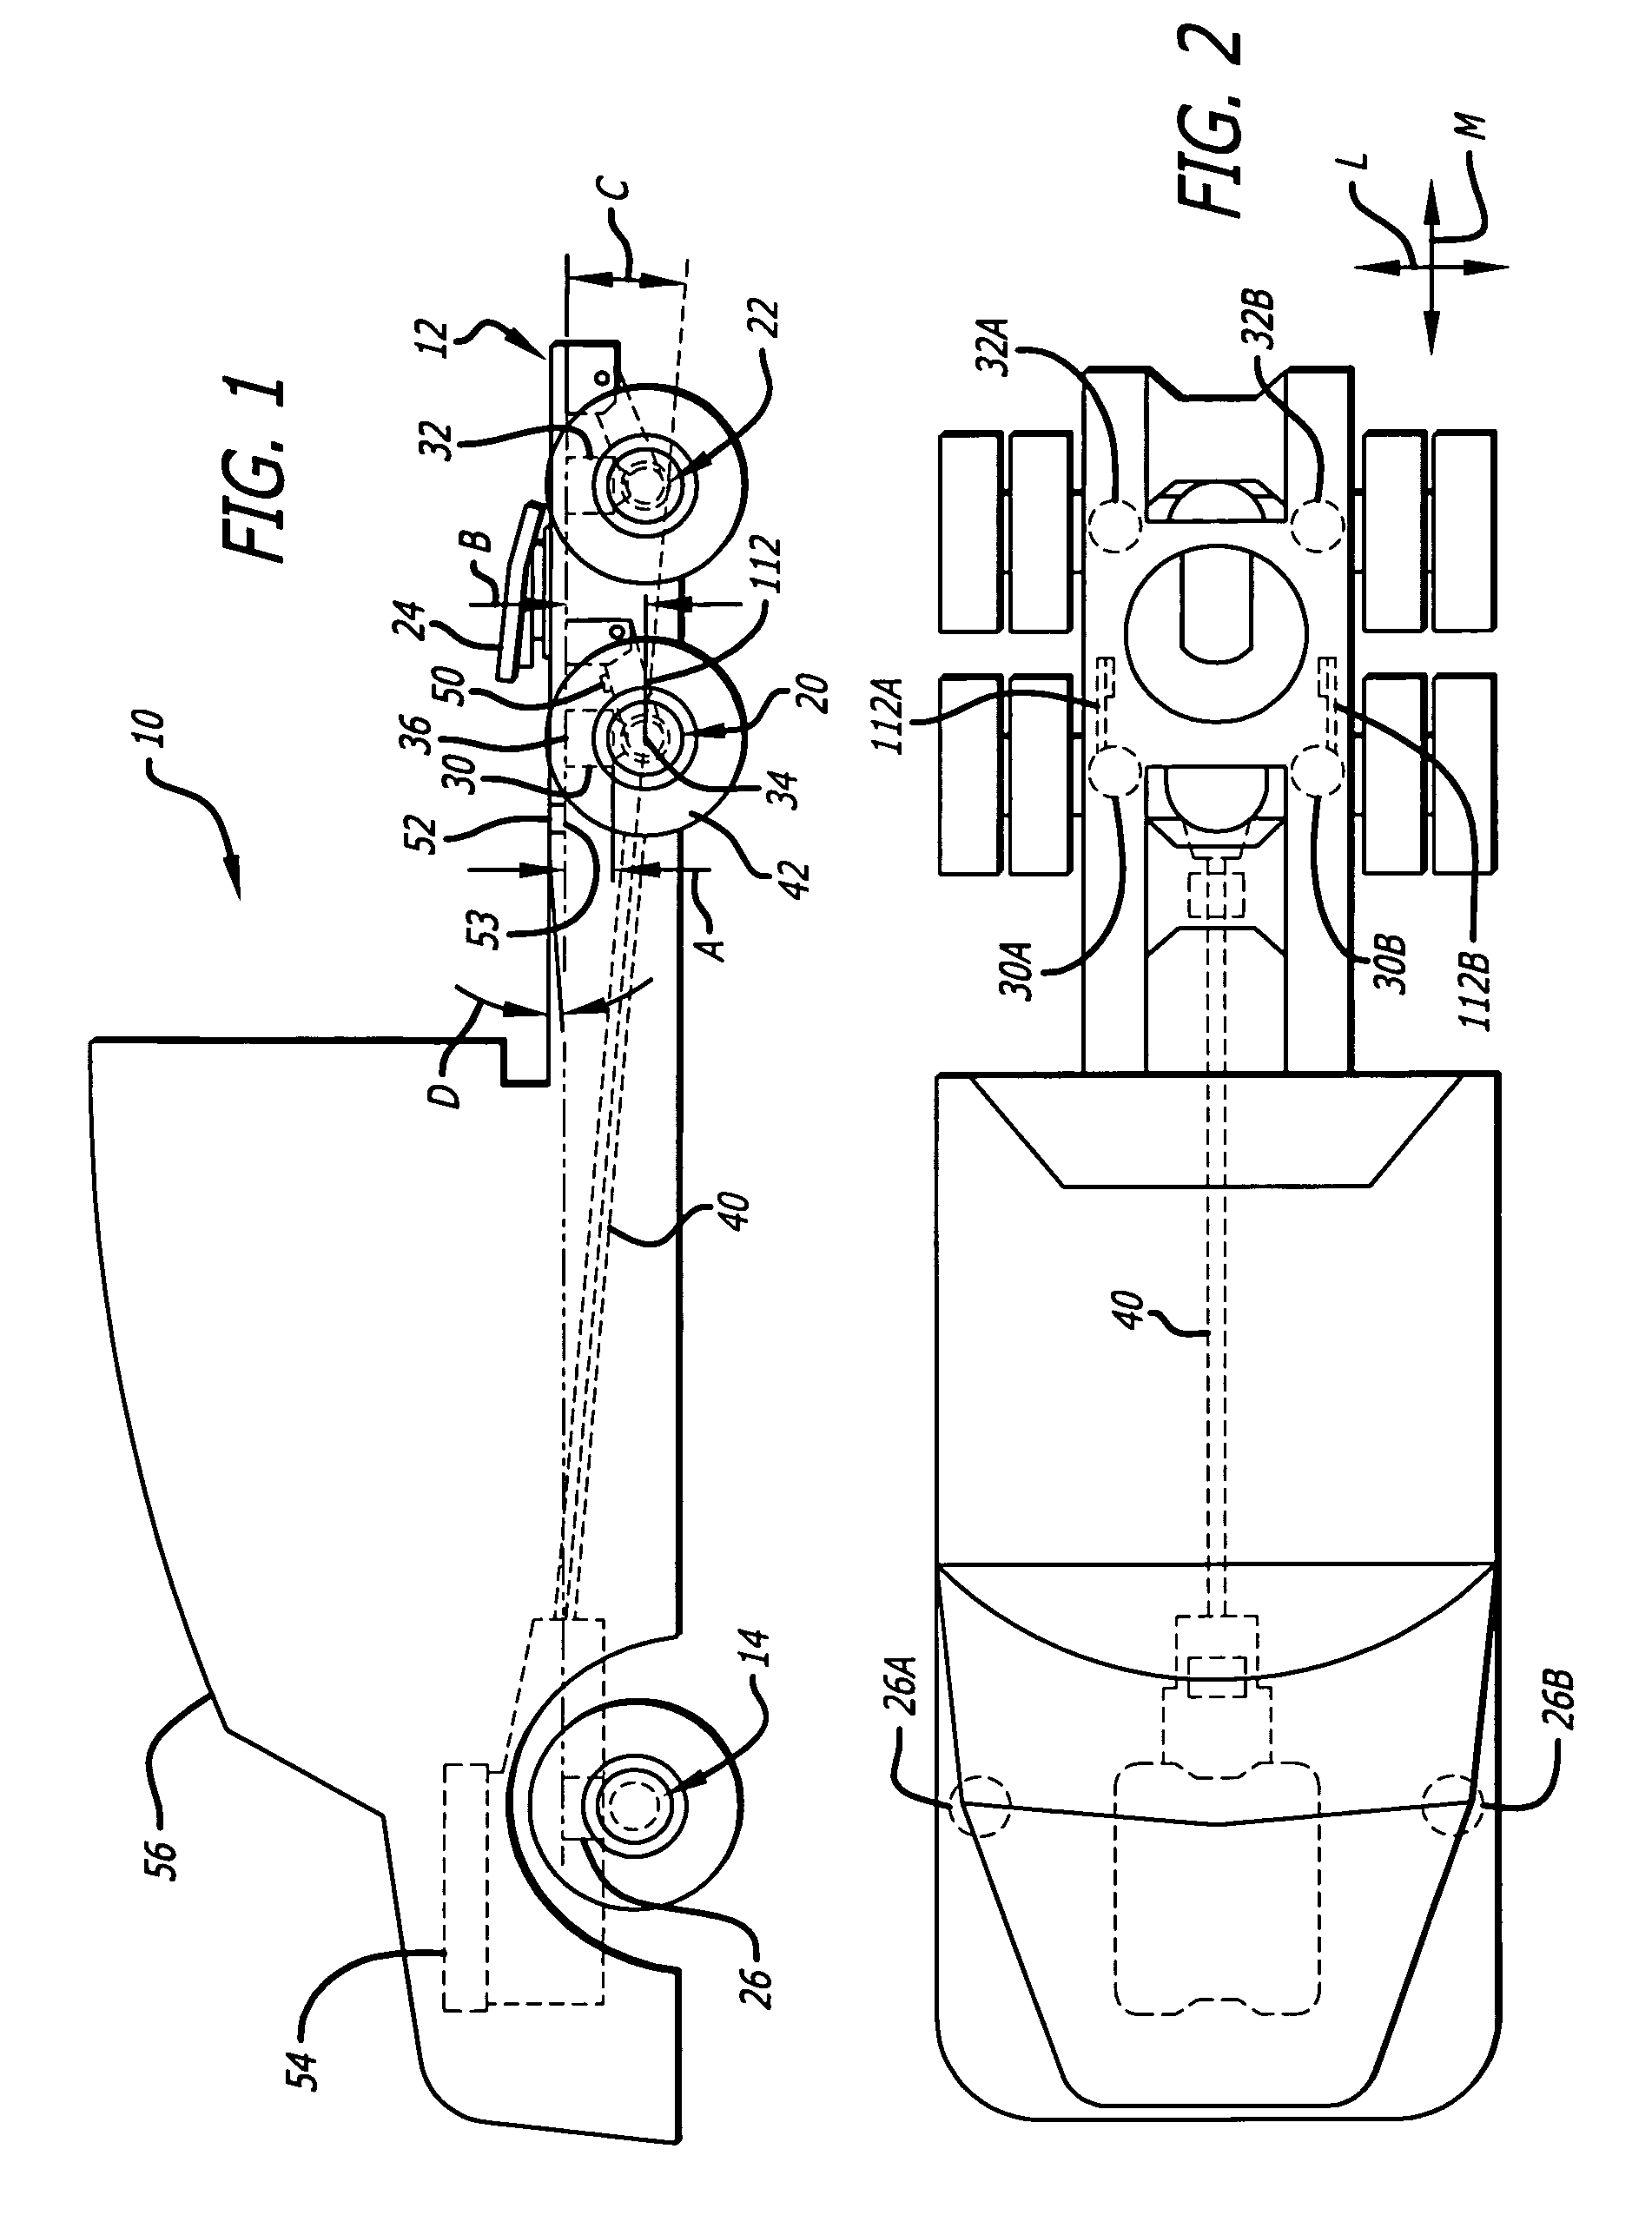 Electronic control of vehicle air suspension